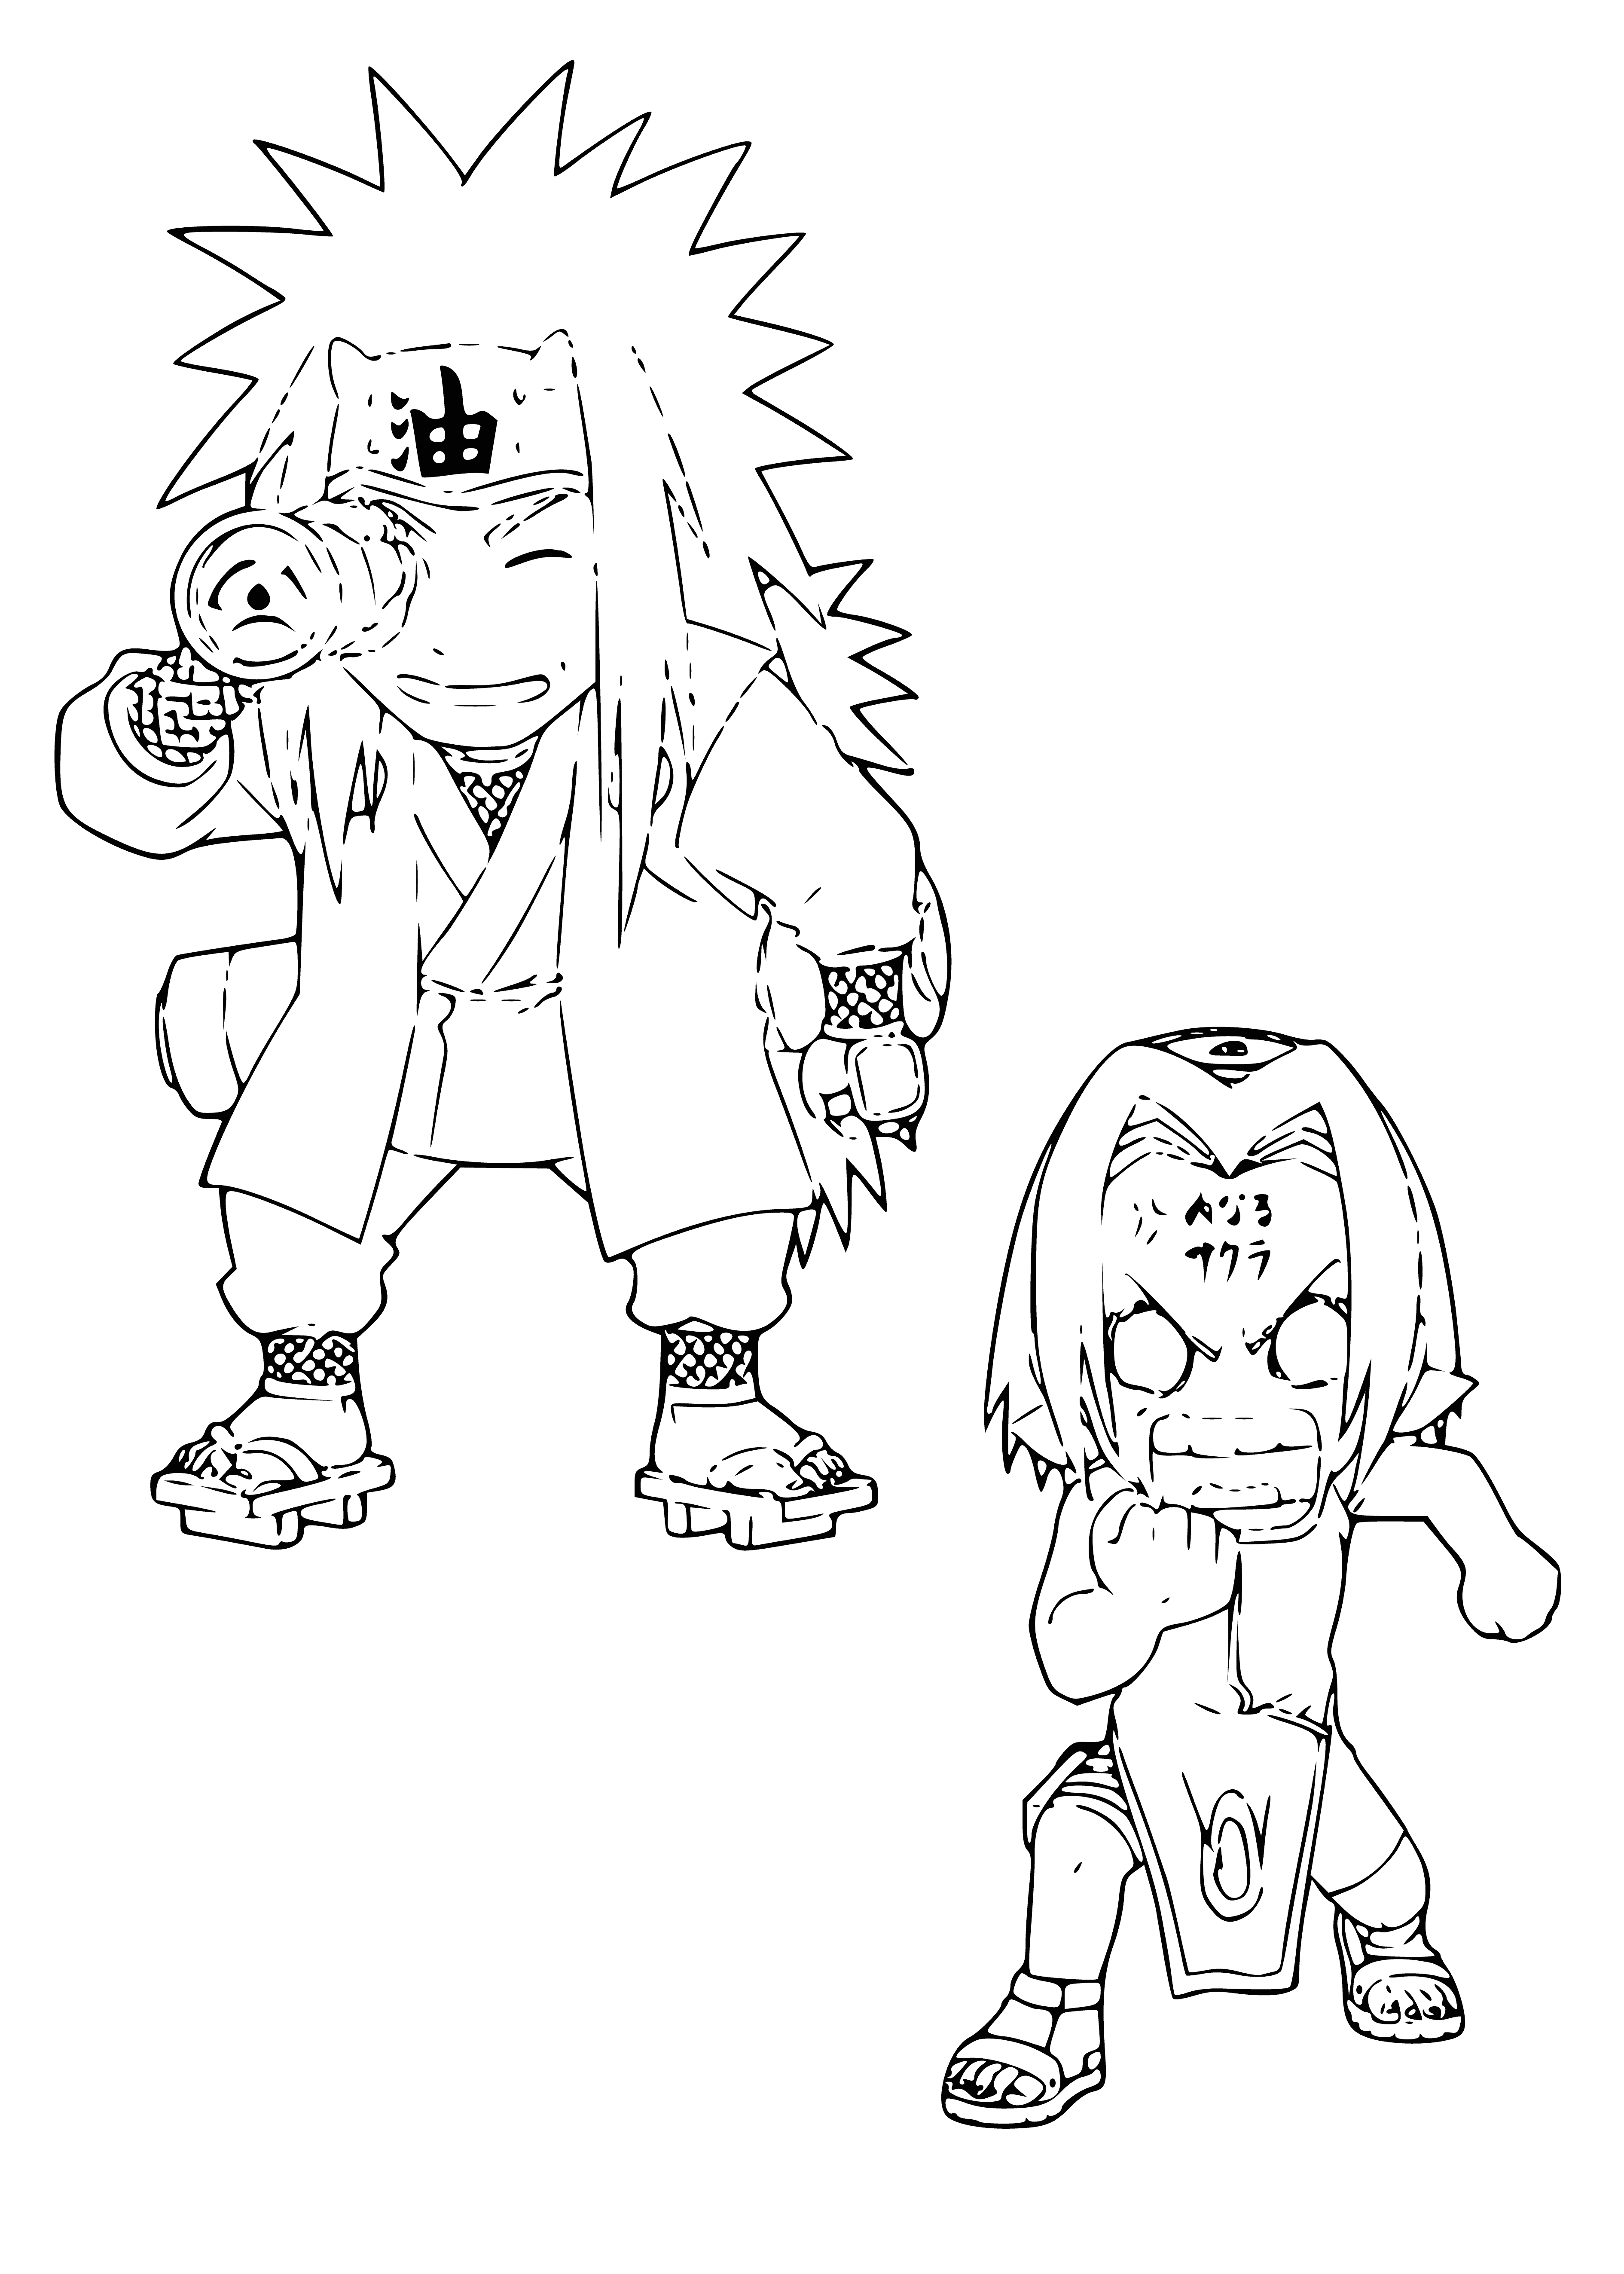 coloring page: Two happily excited kids with unique appearances stand close with one hand on the other's shoulder. #happiness